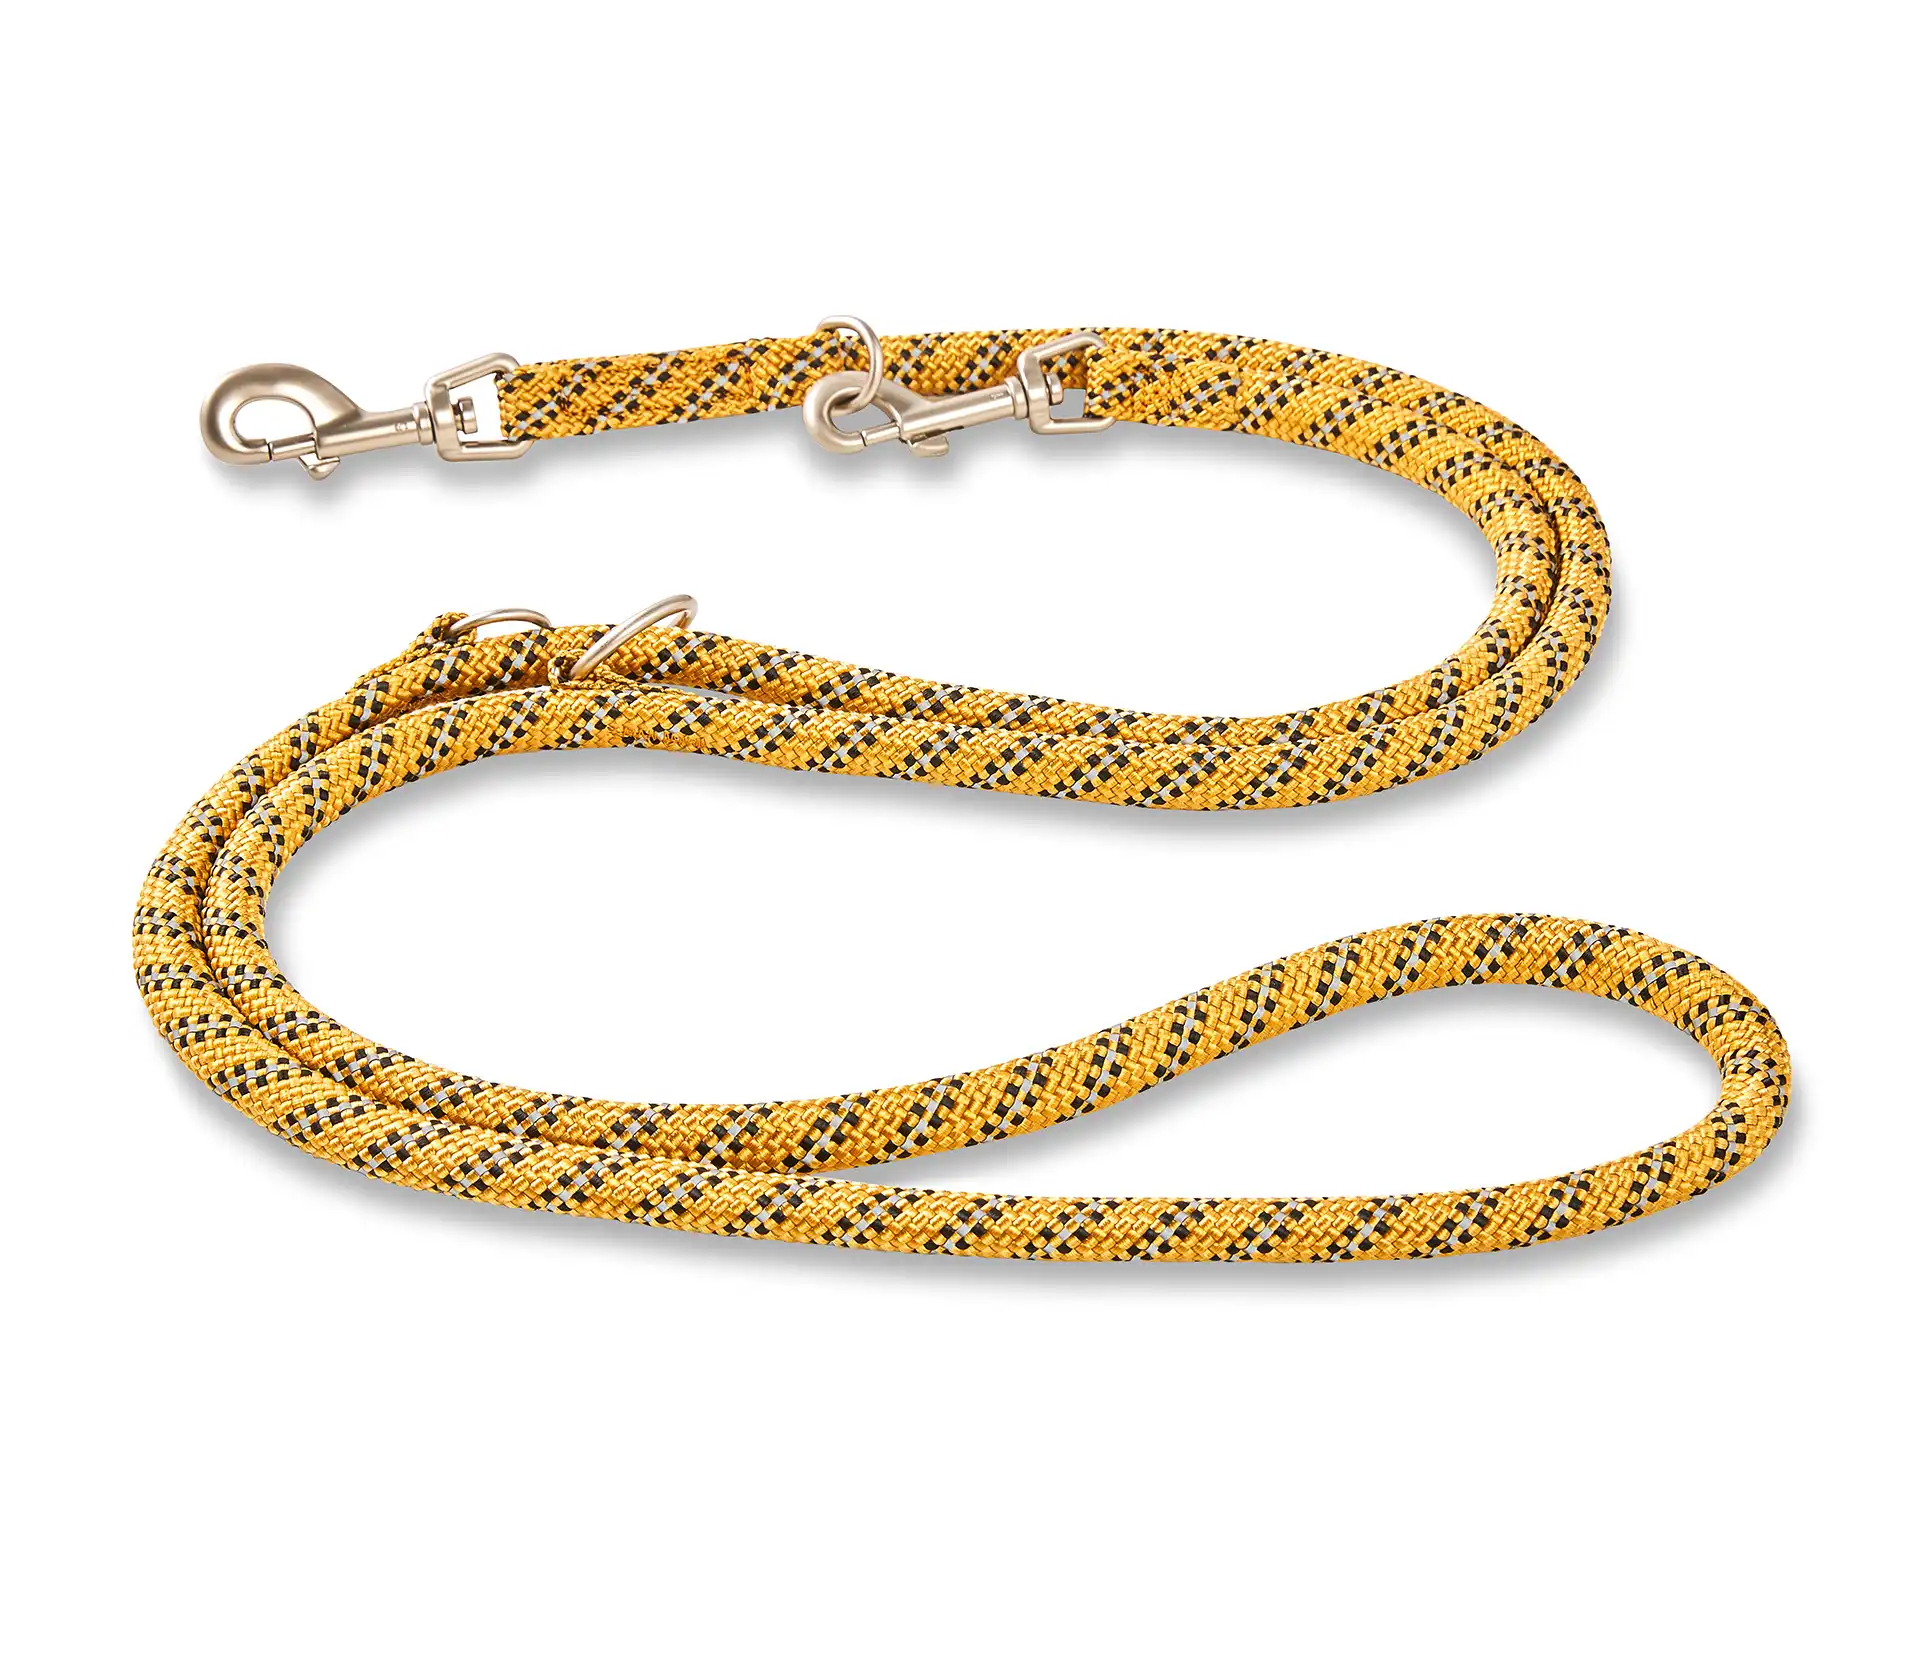 Everest Rope Programme Guide Leash